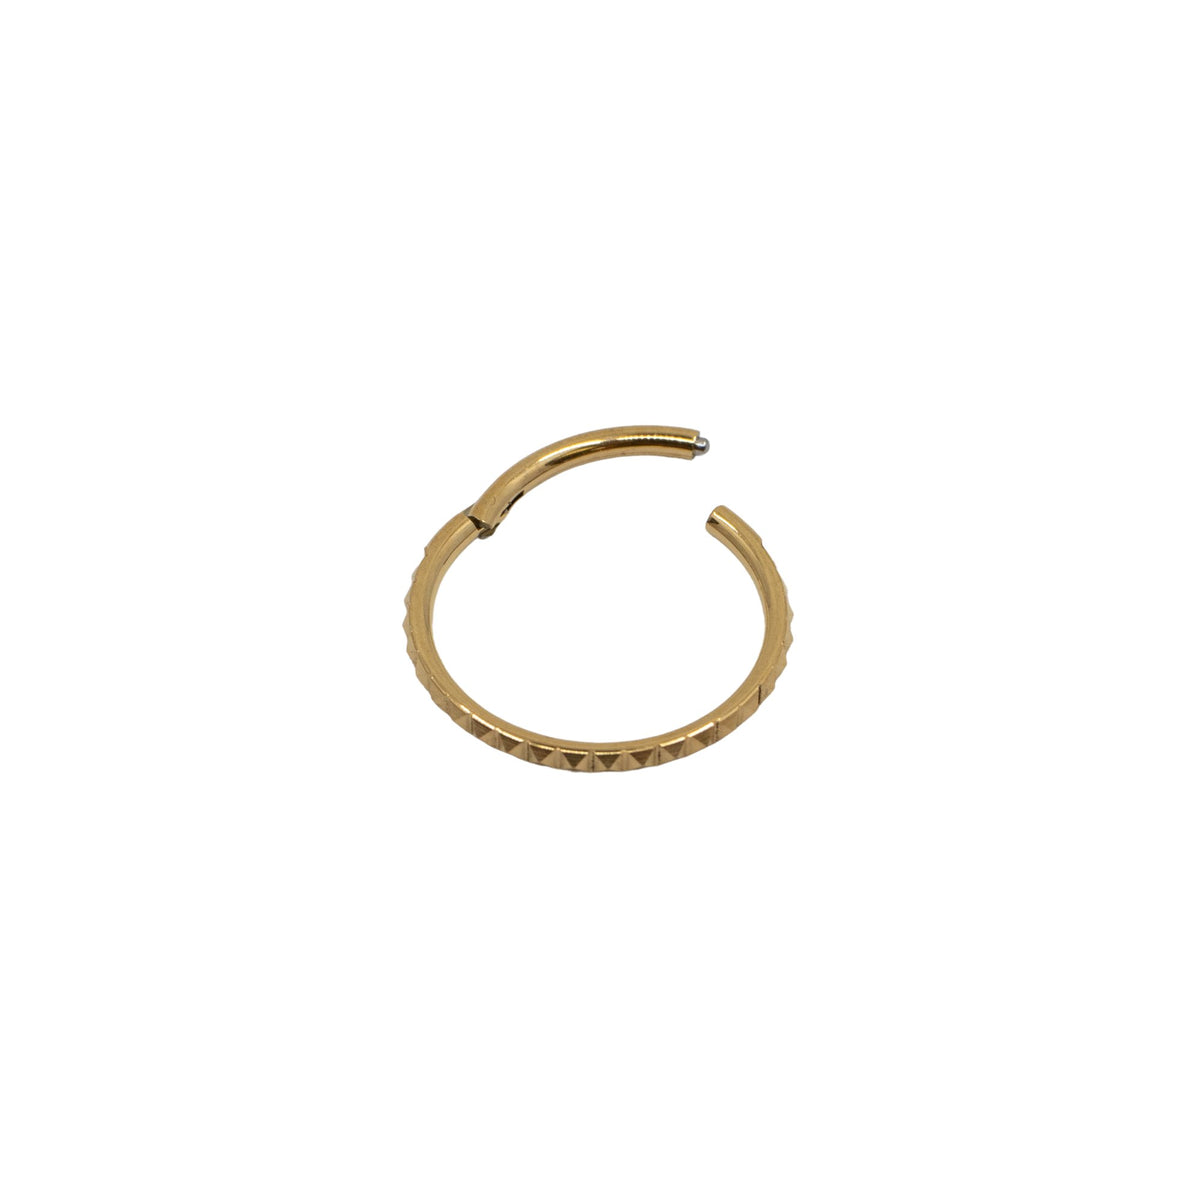 Yellow Gold Hoops Large Peaked Clicker Hoop The Curated Lobecartilagecartilage jewelryclicker hoop